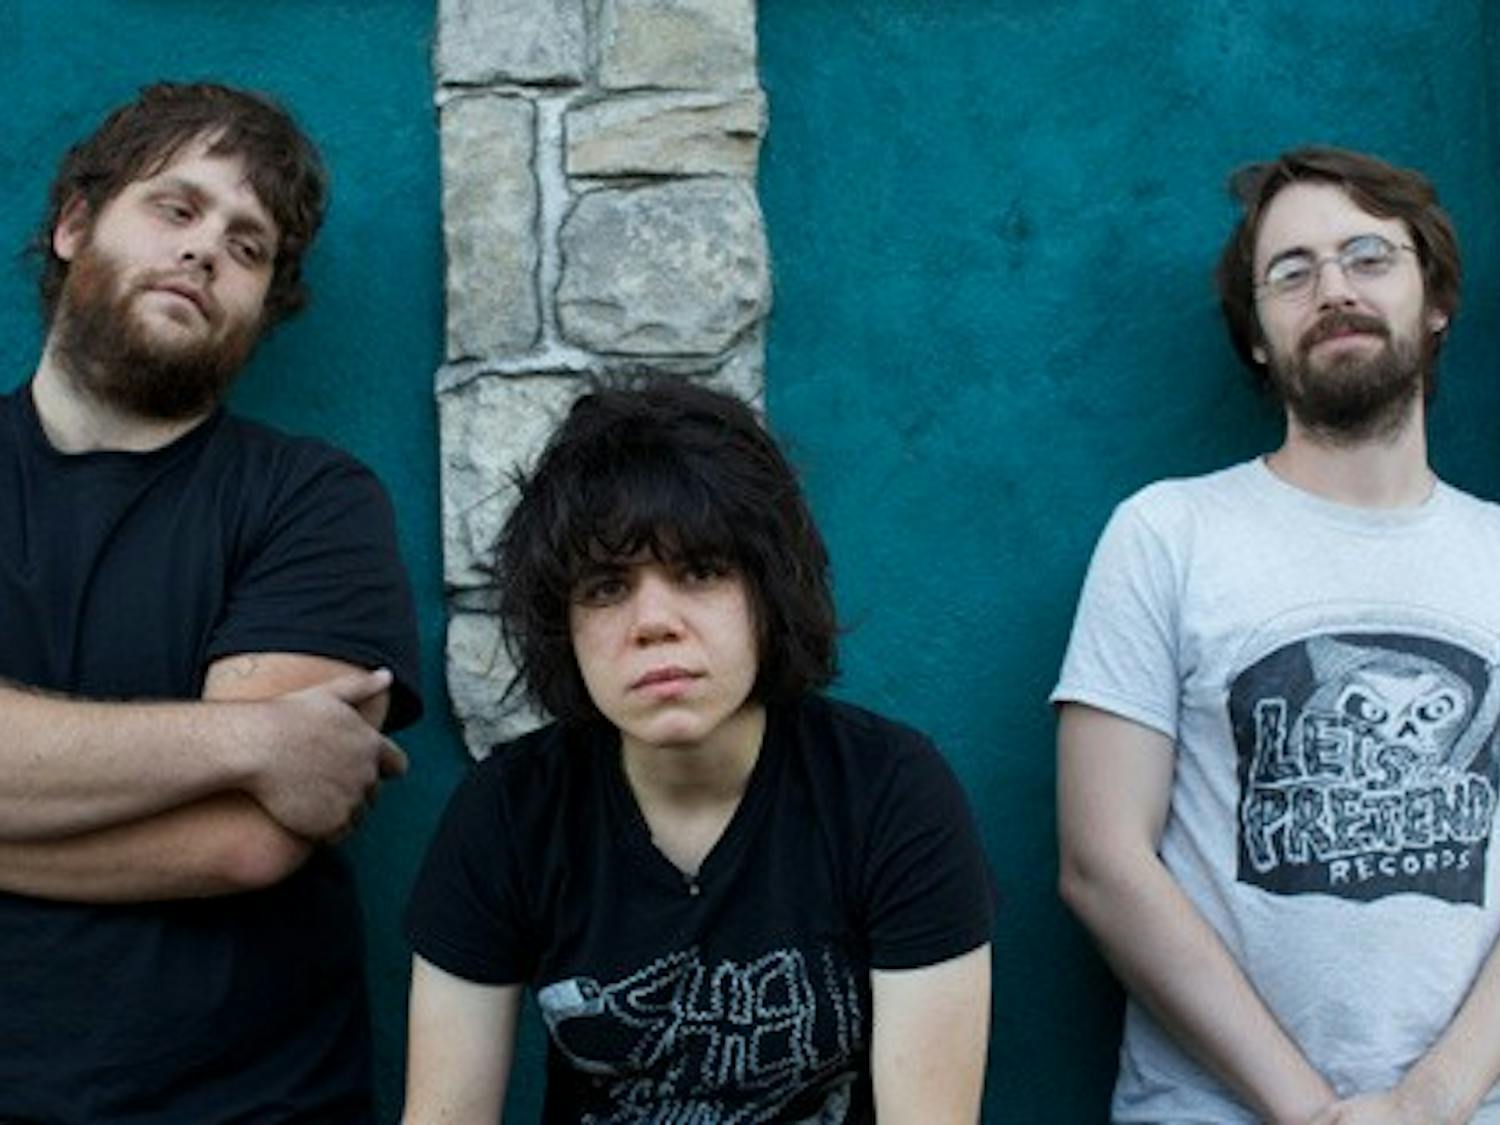 Punk rock trio Screaming Females will perform at the Pinhook in Durham this Thursday, Aug. 27.